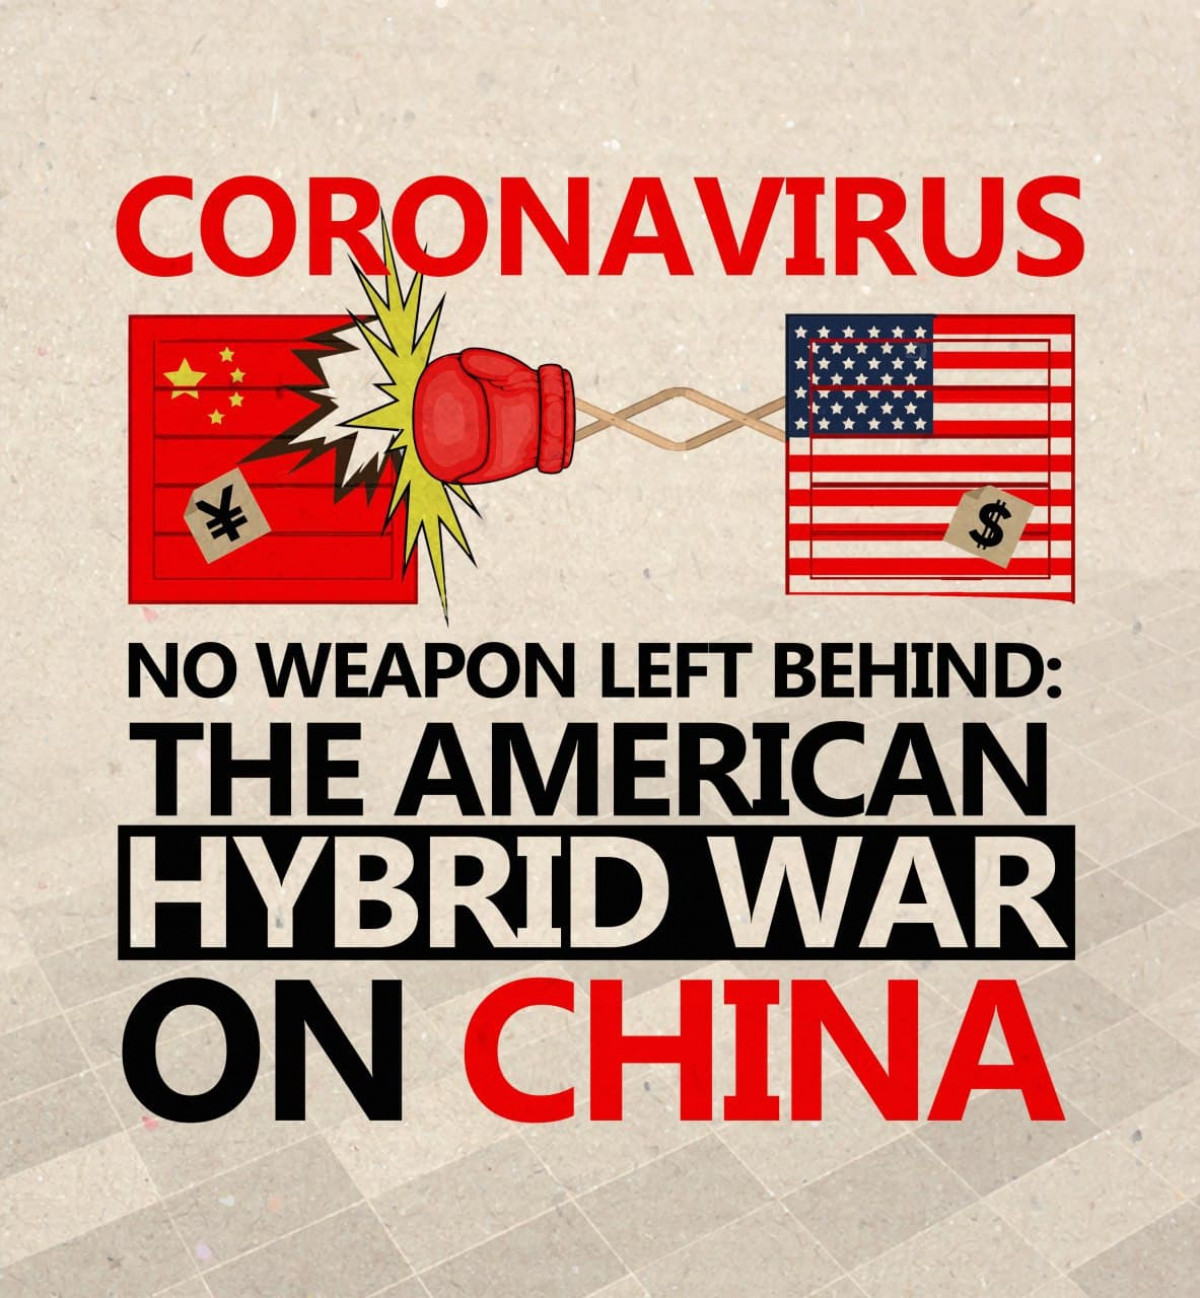 NO WEAPON LEFT BEHIND: THE AMERICAN HYBRID WAR ON CHINA